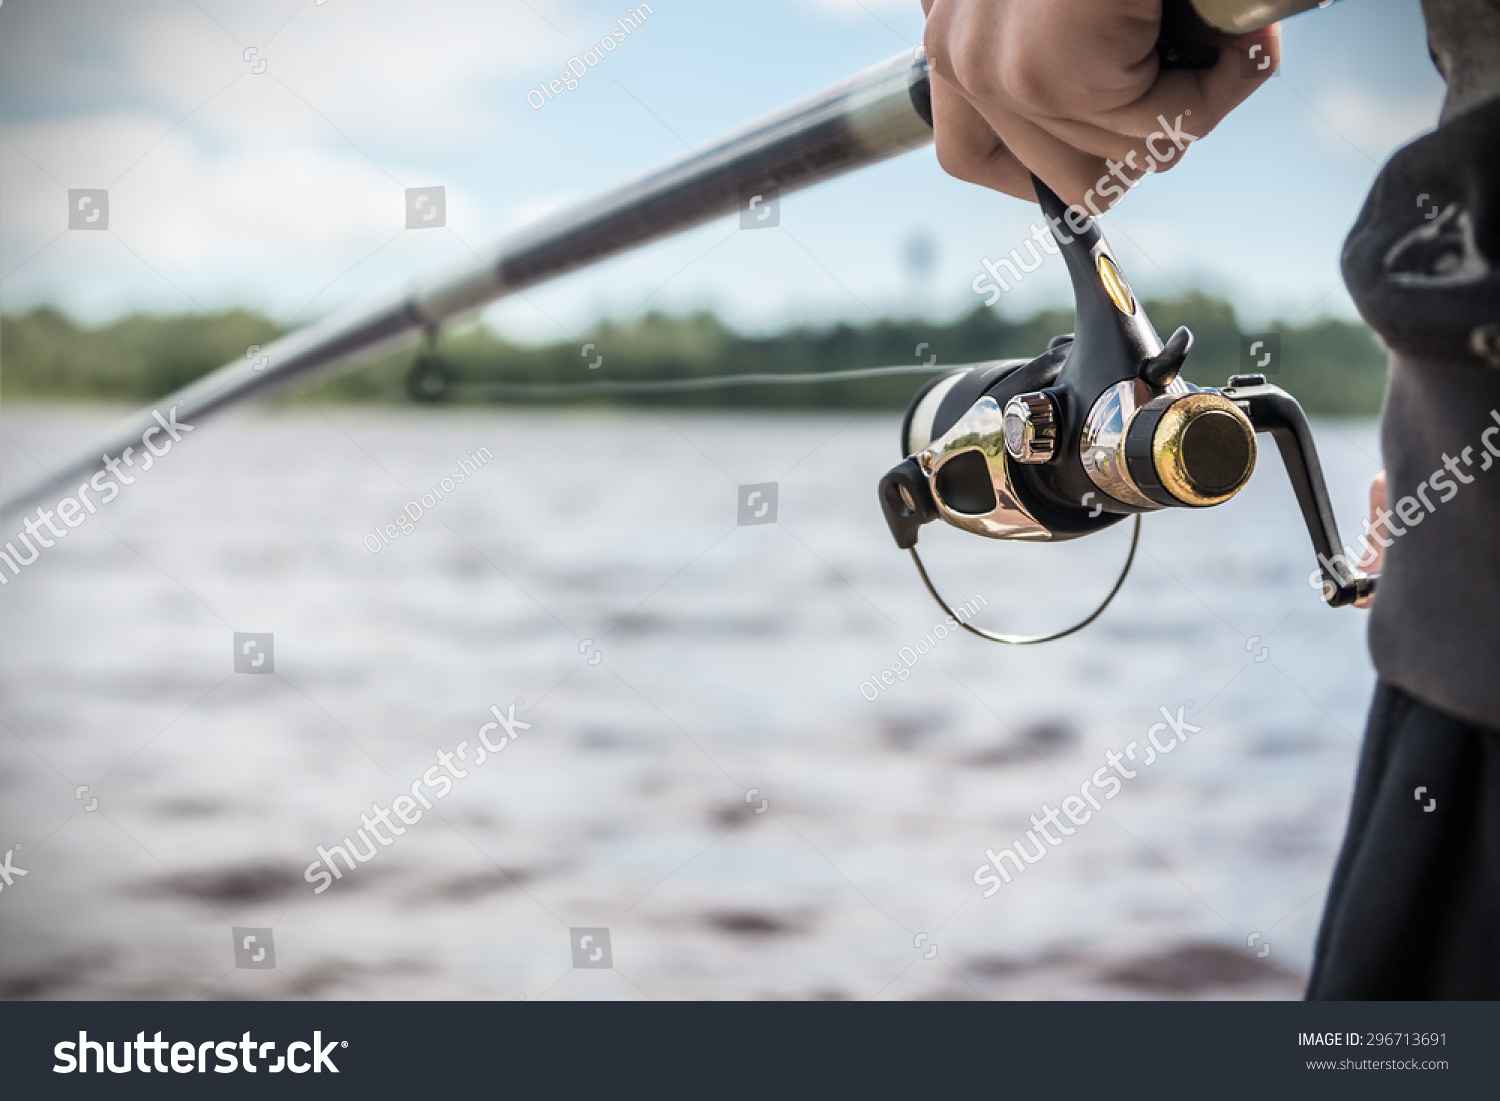 hand holding a fishing rod with reel. Focus on Fishing Reels  #296713691